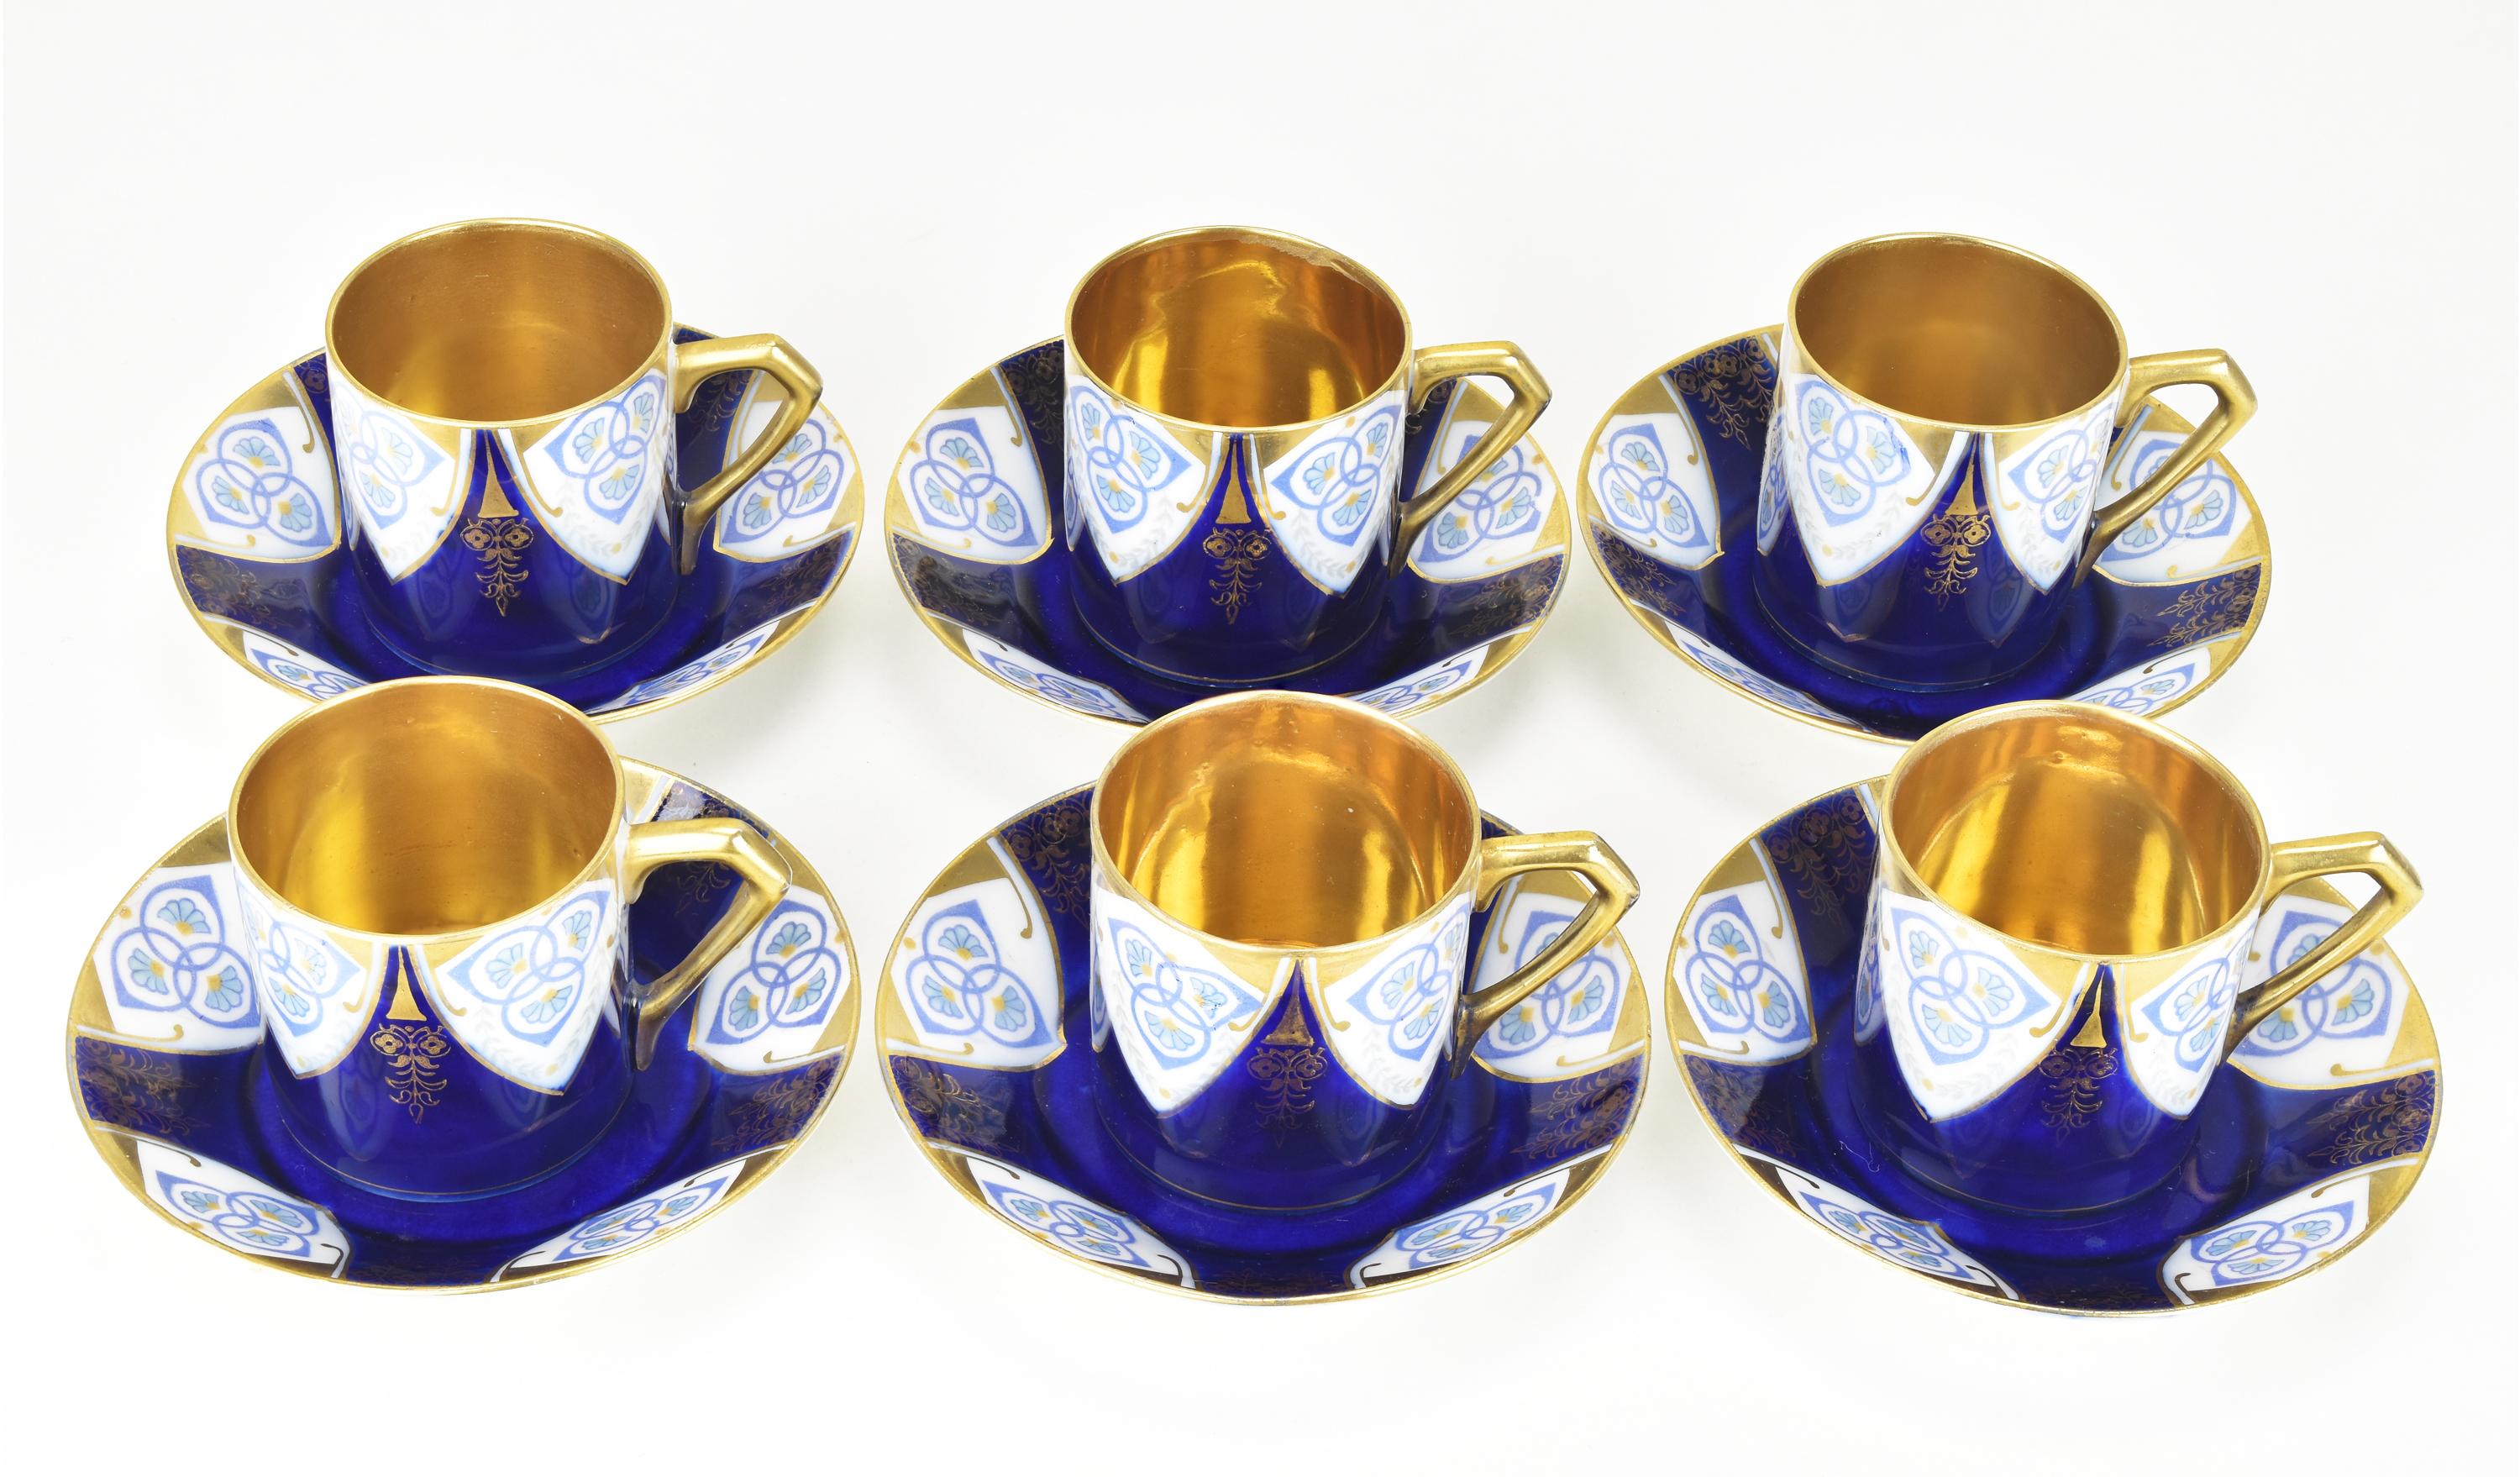 This set is made of fine white porcelain, and each cup and saucer is decorated with a unique secessionist pattern which reminds on designs by Joseph Maria Olbrich. 
The pattern feature stylized floral and geometric designs in cartouches on a cobalt